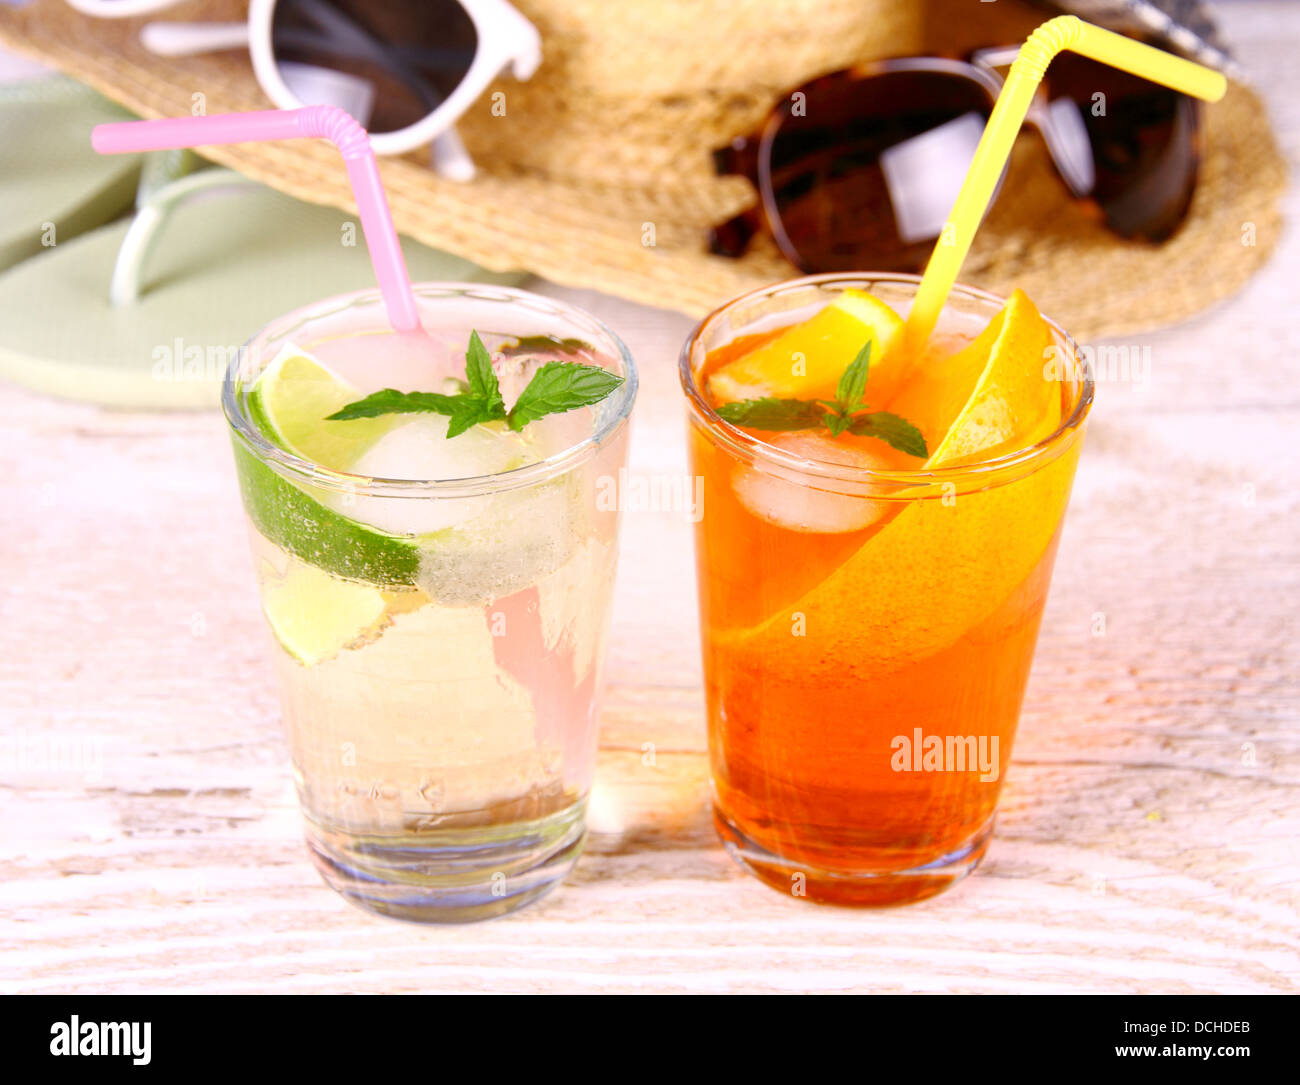 Mojito, orange cocktails with straw and holiday background, close up Stock Photo